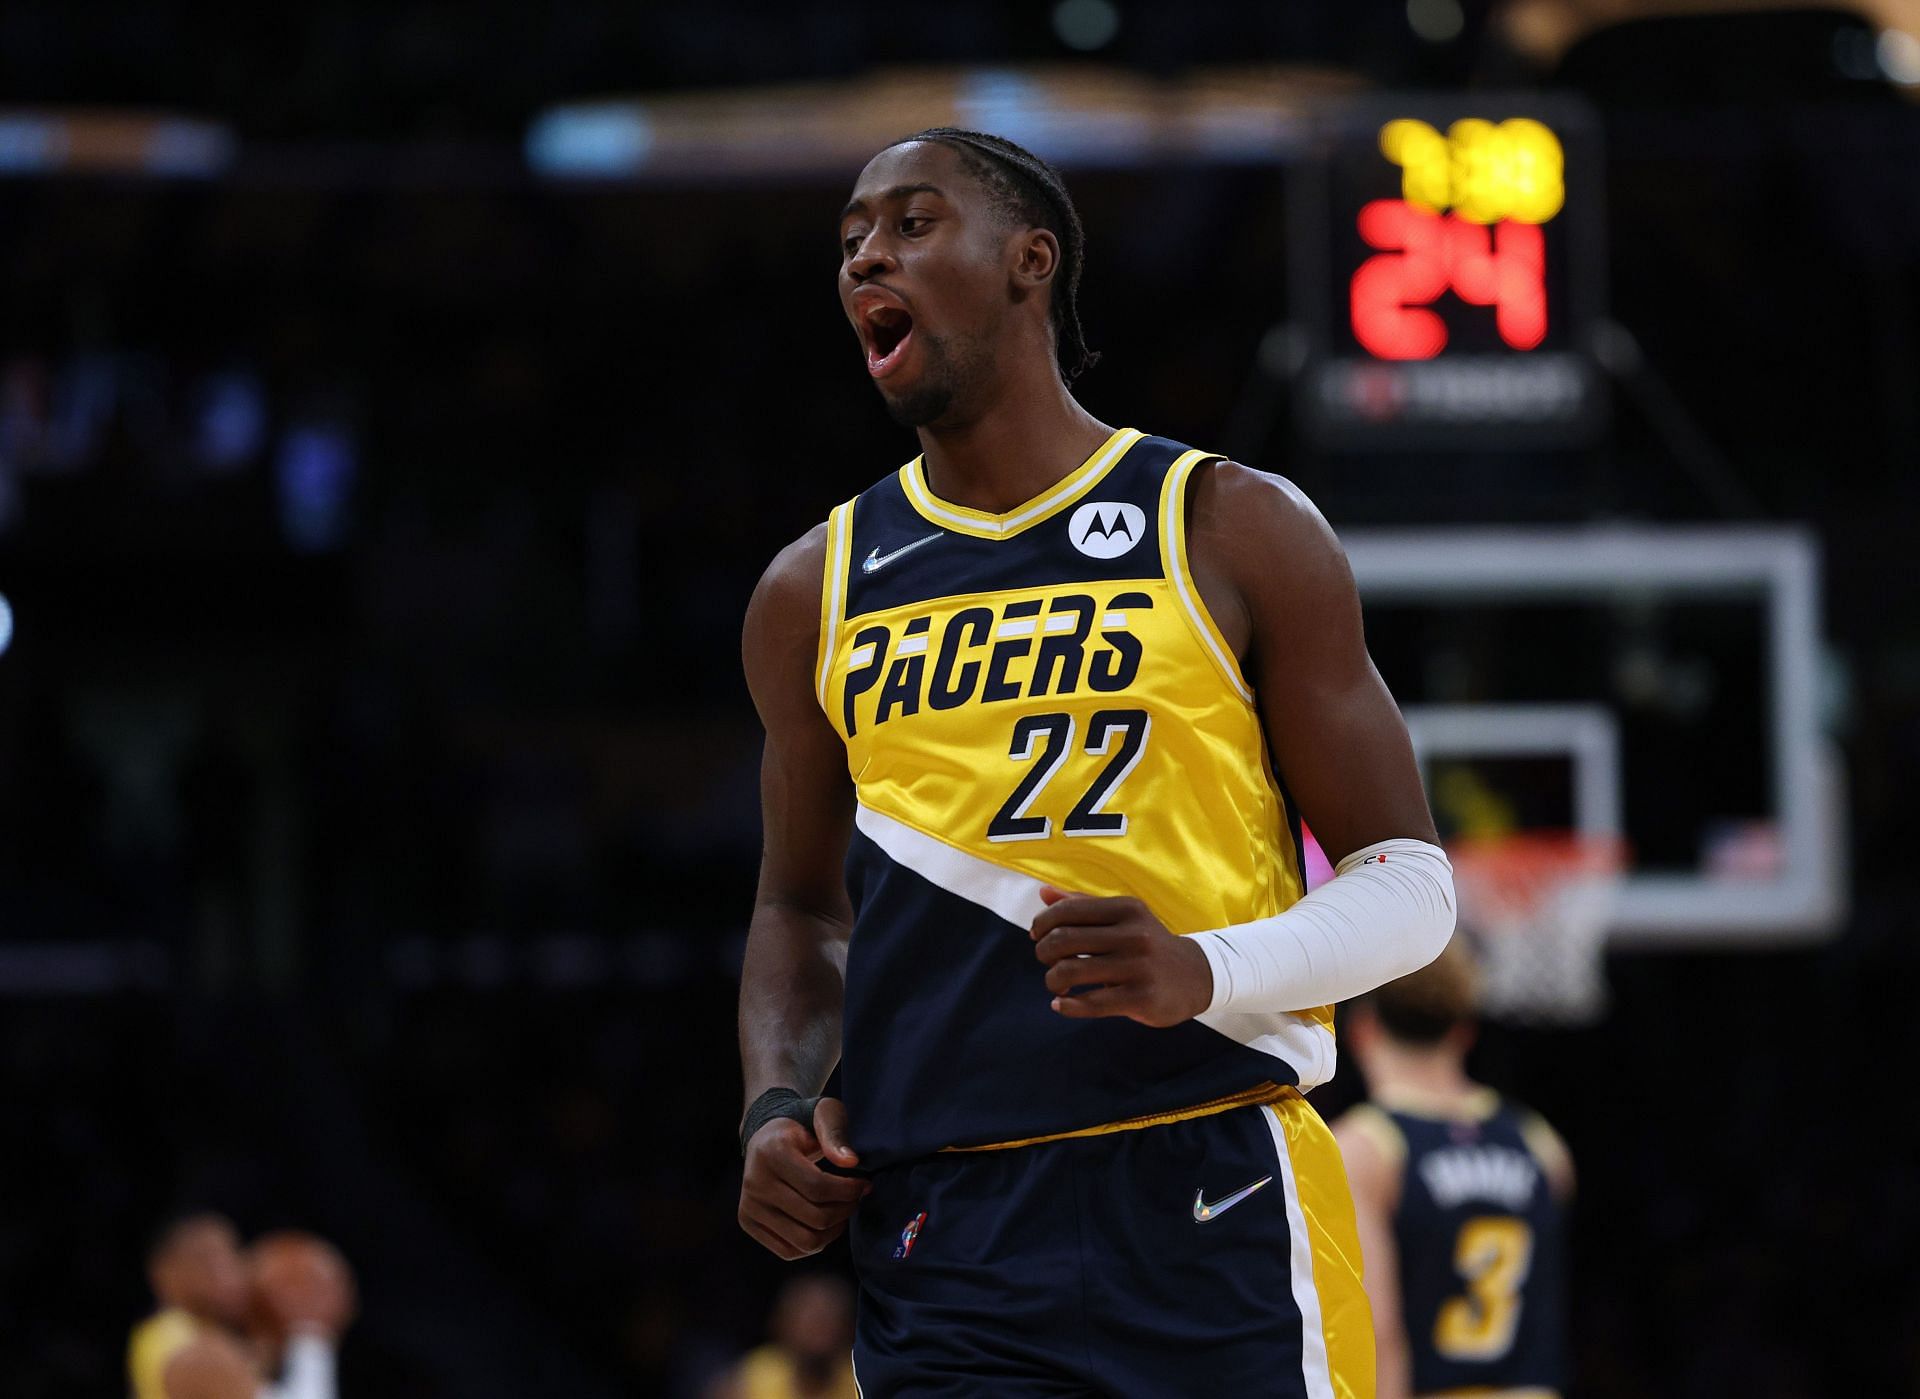 Caris LeVert of the Indiana Pacers celebrates a 3-pointer during a 111-104 win over the LA Lakers at Crypto.com Arena on Jan. 19 in Los Angeles, California.